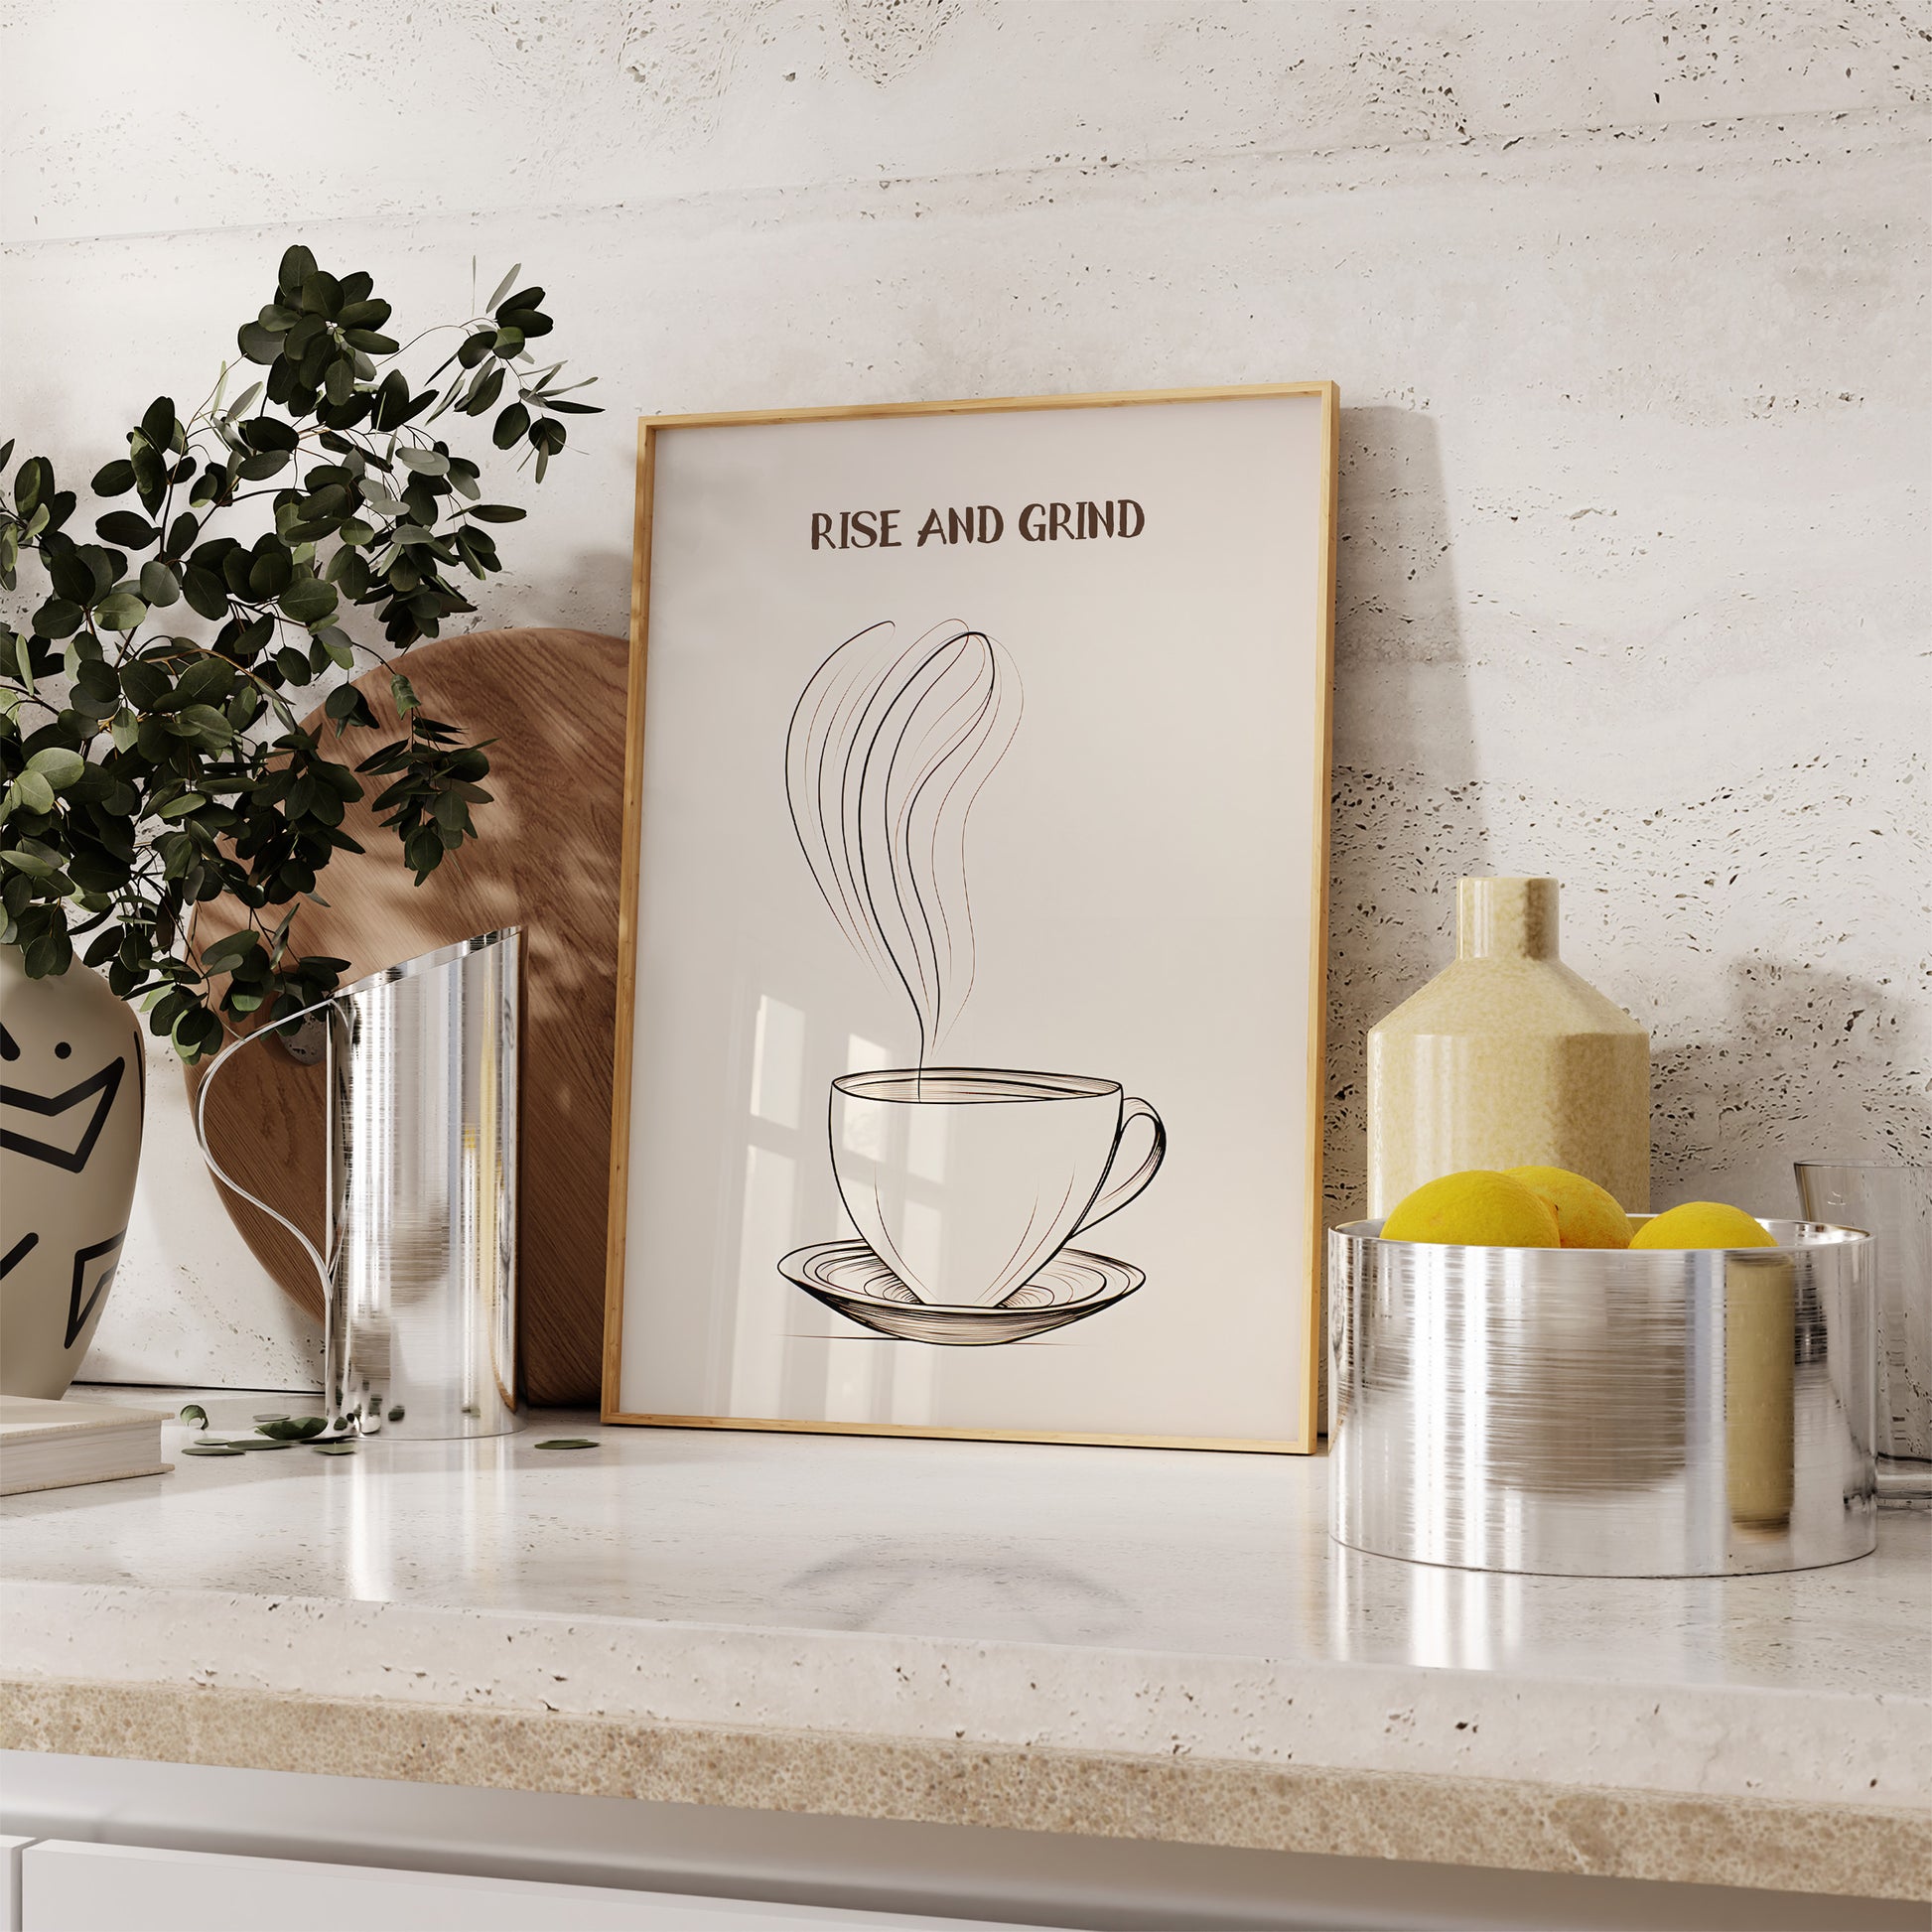 A framed poster with a coffee cup design and the text "Rise and Grind" on a kitchen countertop.